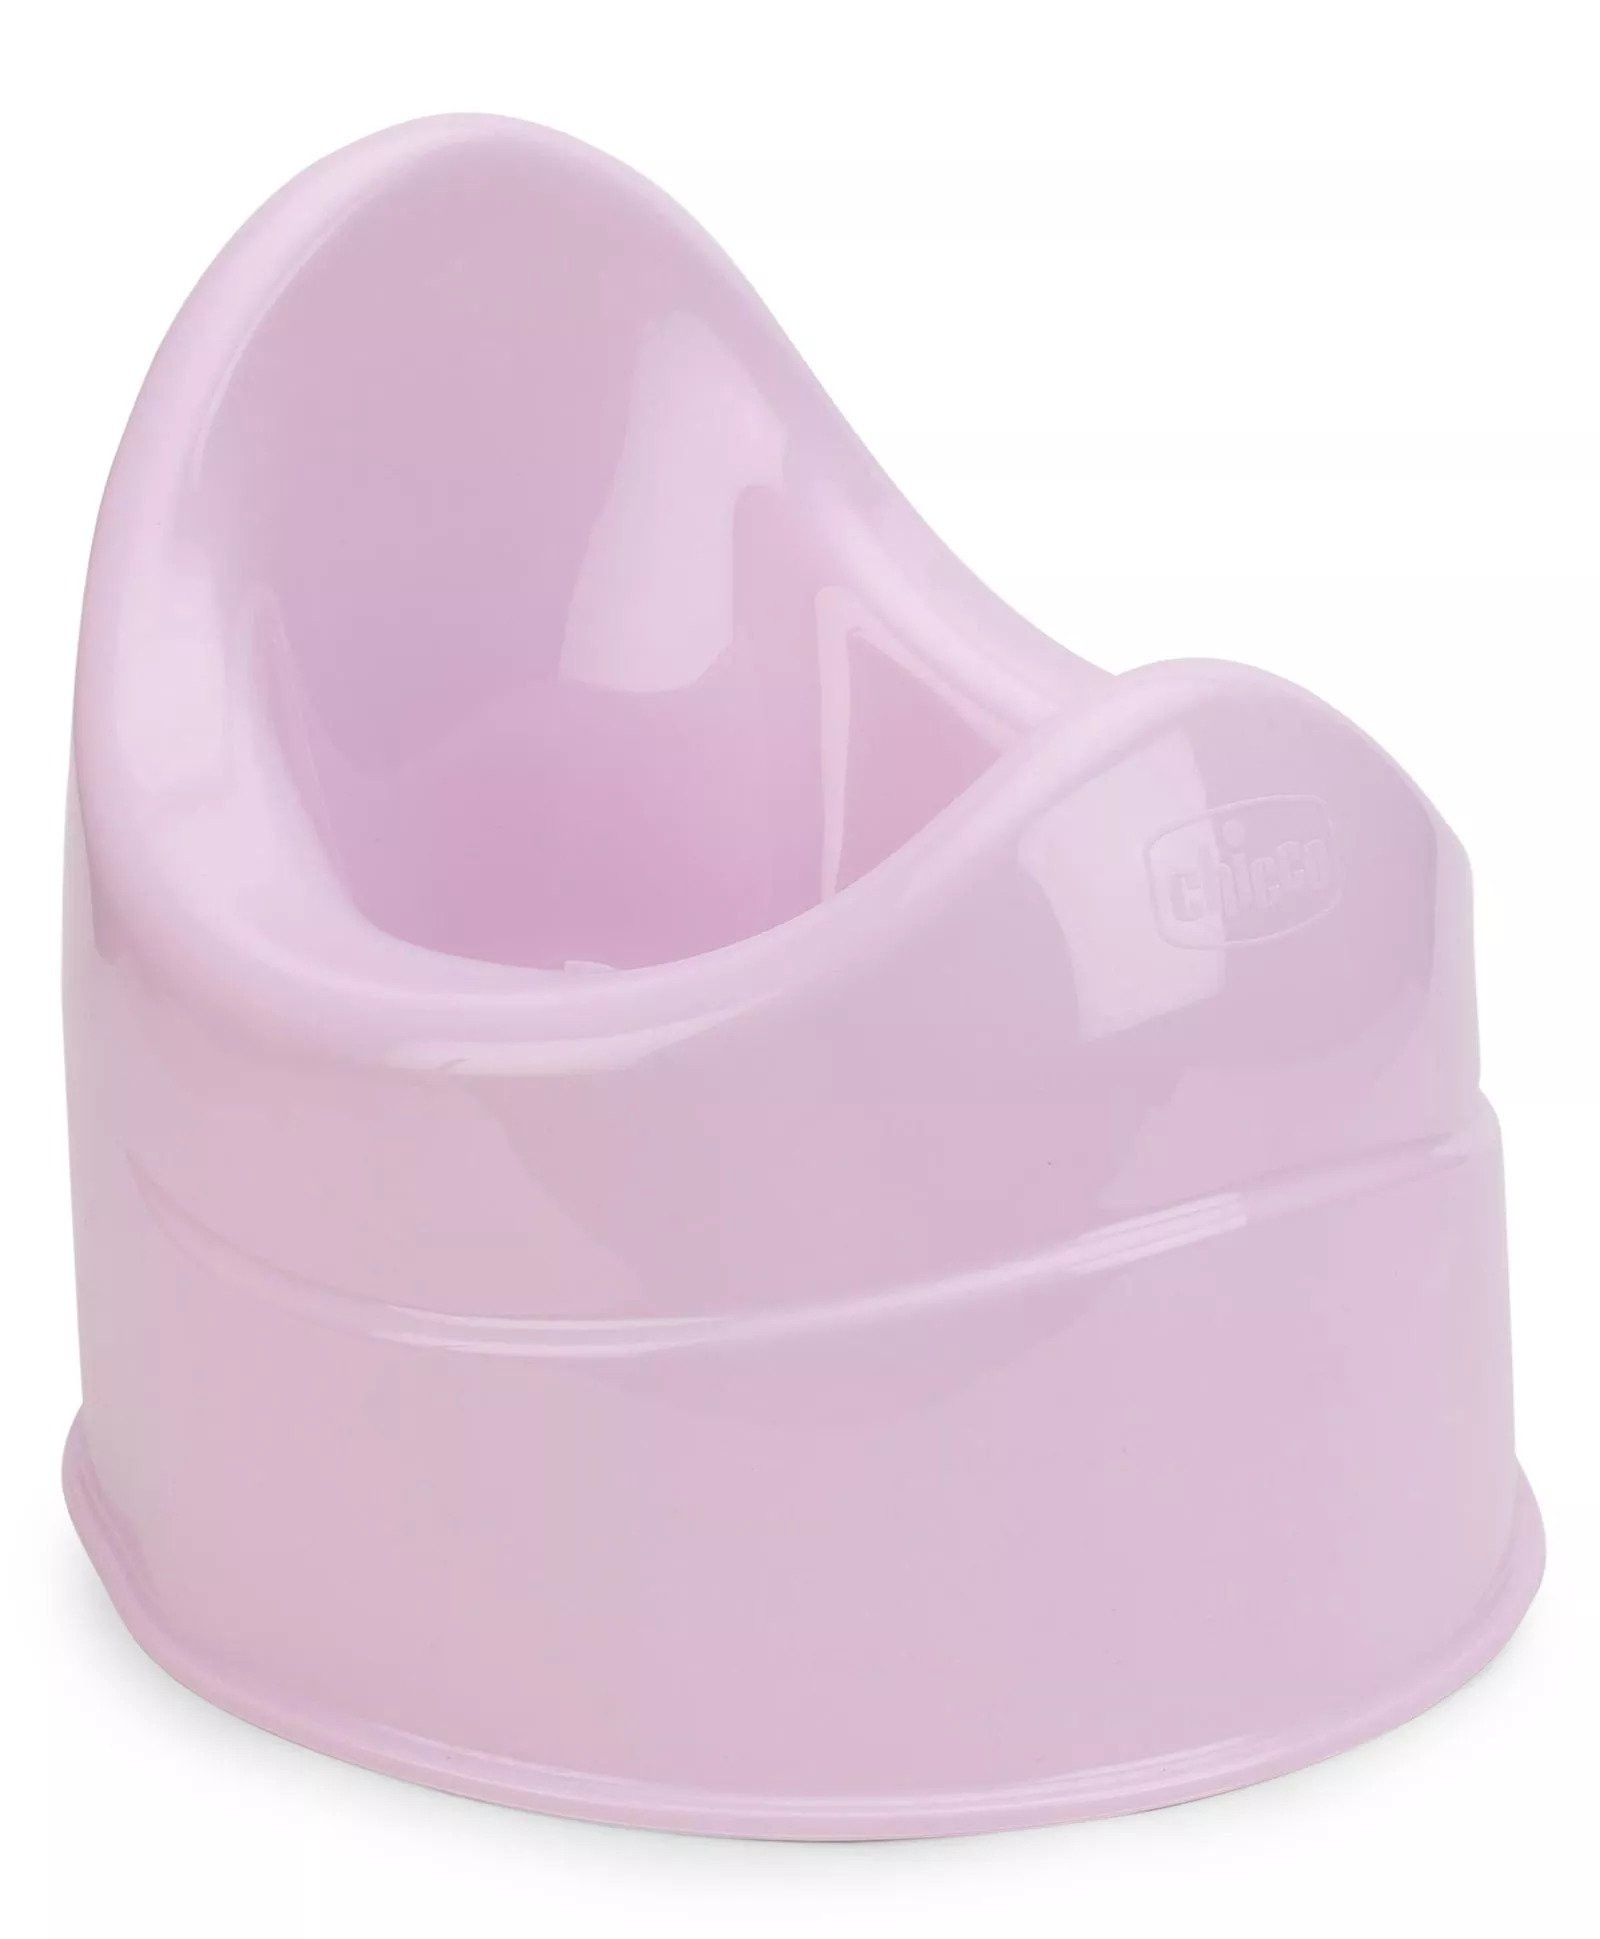 Chicco Anatomical Potty Chair - Potty Seats & Chairs - Diapers & Potty ...